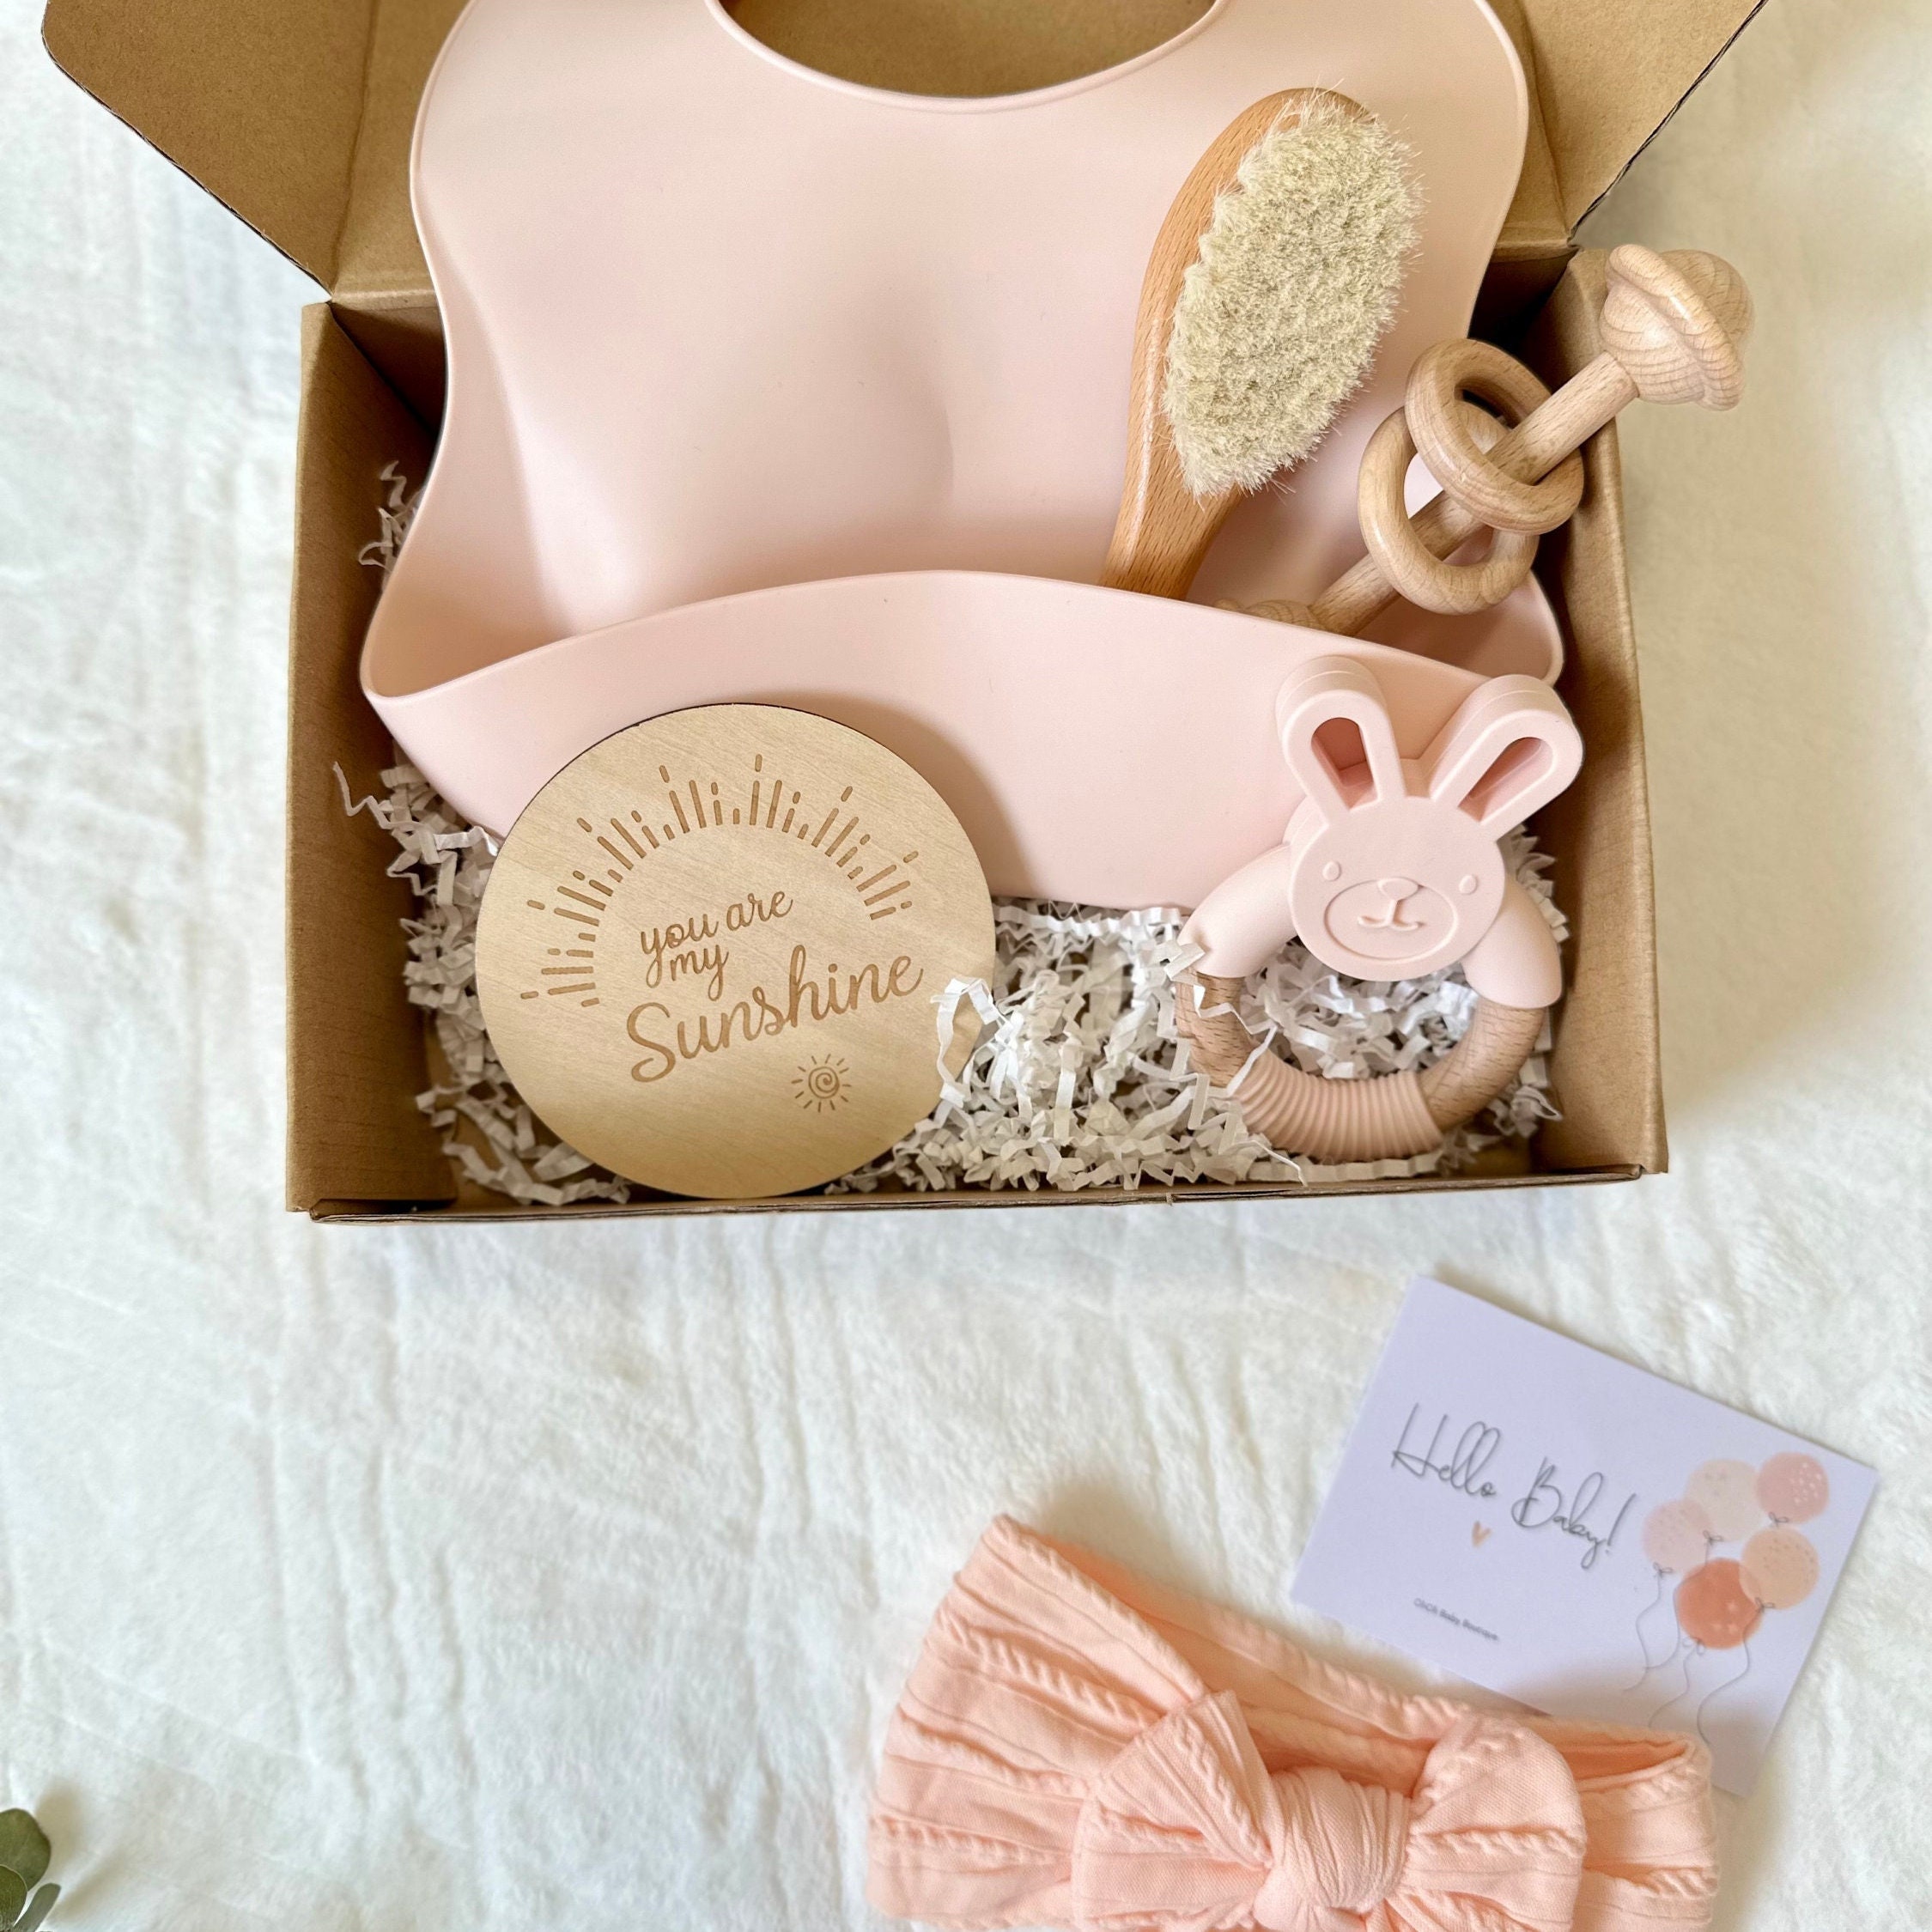 Huge Baby Girl Gift Basket - Welcome Wagon - Pink | Our Green House